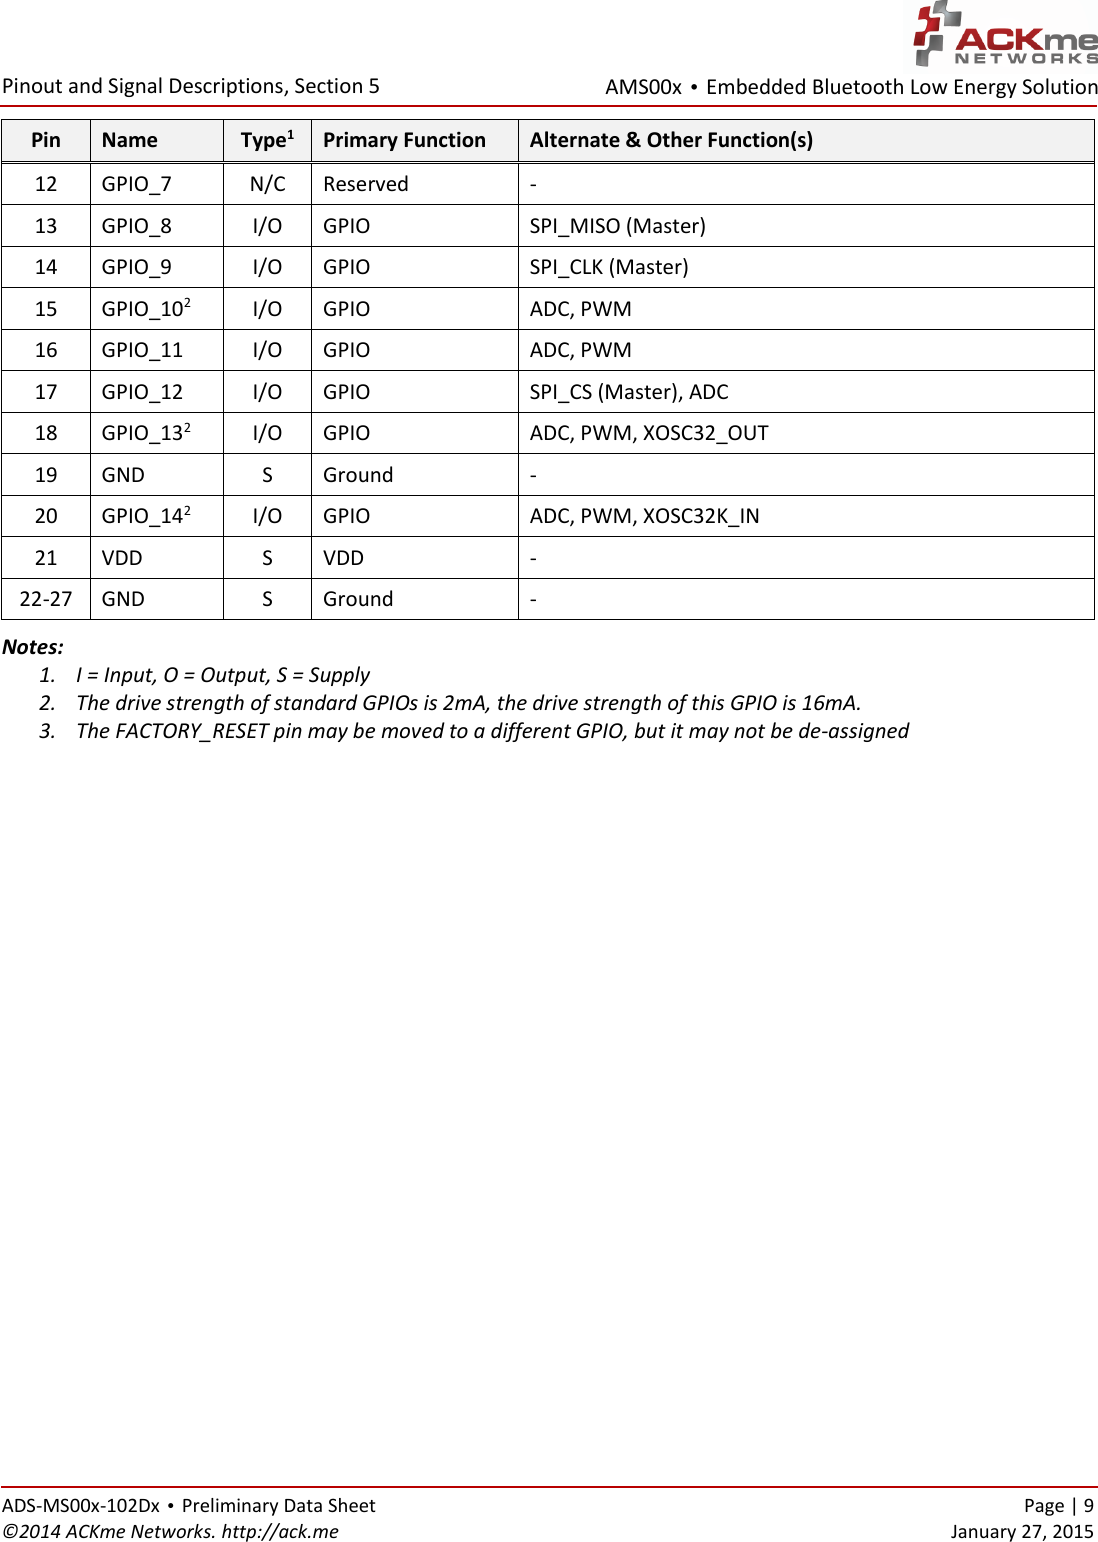 AMS00x • Embedded Bluetooth Low Energy Solution  Pinout and Signal Descriptions, Section 5 ADS-MS00x-102Dx • Preliminary Data Sheet    Page | 9 ©2014 ACKme Networks. http://ack.me    January 27, 2015 Pin Name Type1 Primary Function  Alternate &amp; Other Function(s) 12 GPIO_7 N/C Reserved - 13 GPIO_8 I/O GPIO SPI_MISO (Master) 14 GPIO_9 I/O GPIO SPI_CLK (Master) 15 GPIO_102 I/O GPIO ADC, PWM 16 GPIO_11 I/O GPIO ADC, PWM 17 GPIO_12 I/O GPIO SPI_CS (Master), ADC 18 GPIO_132 I/O GPIO ADC, PWM, XOSC32_OUT 19 GND S Ground - 20 GPIO_142 I/O GPIO  ADC, PWM, XOSC32K_IN  21 VDD S VDD - 22-27 GND S Ground - Notes: 1. I = Input, O = Output, S = Supply 2. The drive strength of standard GPIOs is 2mA, the drive strength of this GPIO is 16mA. 3. The FACTORY_RESET pin may be moved to a different GPIO, but it may not be de-assigned   